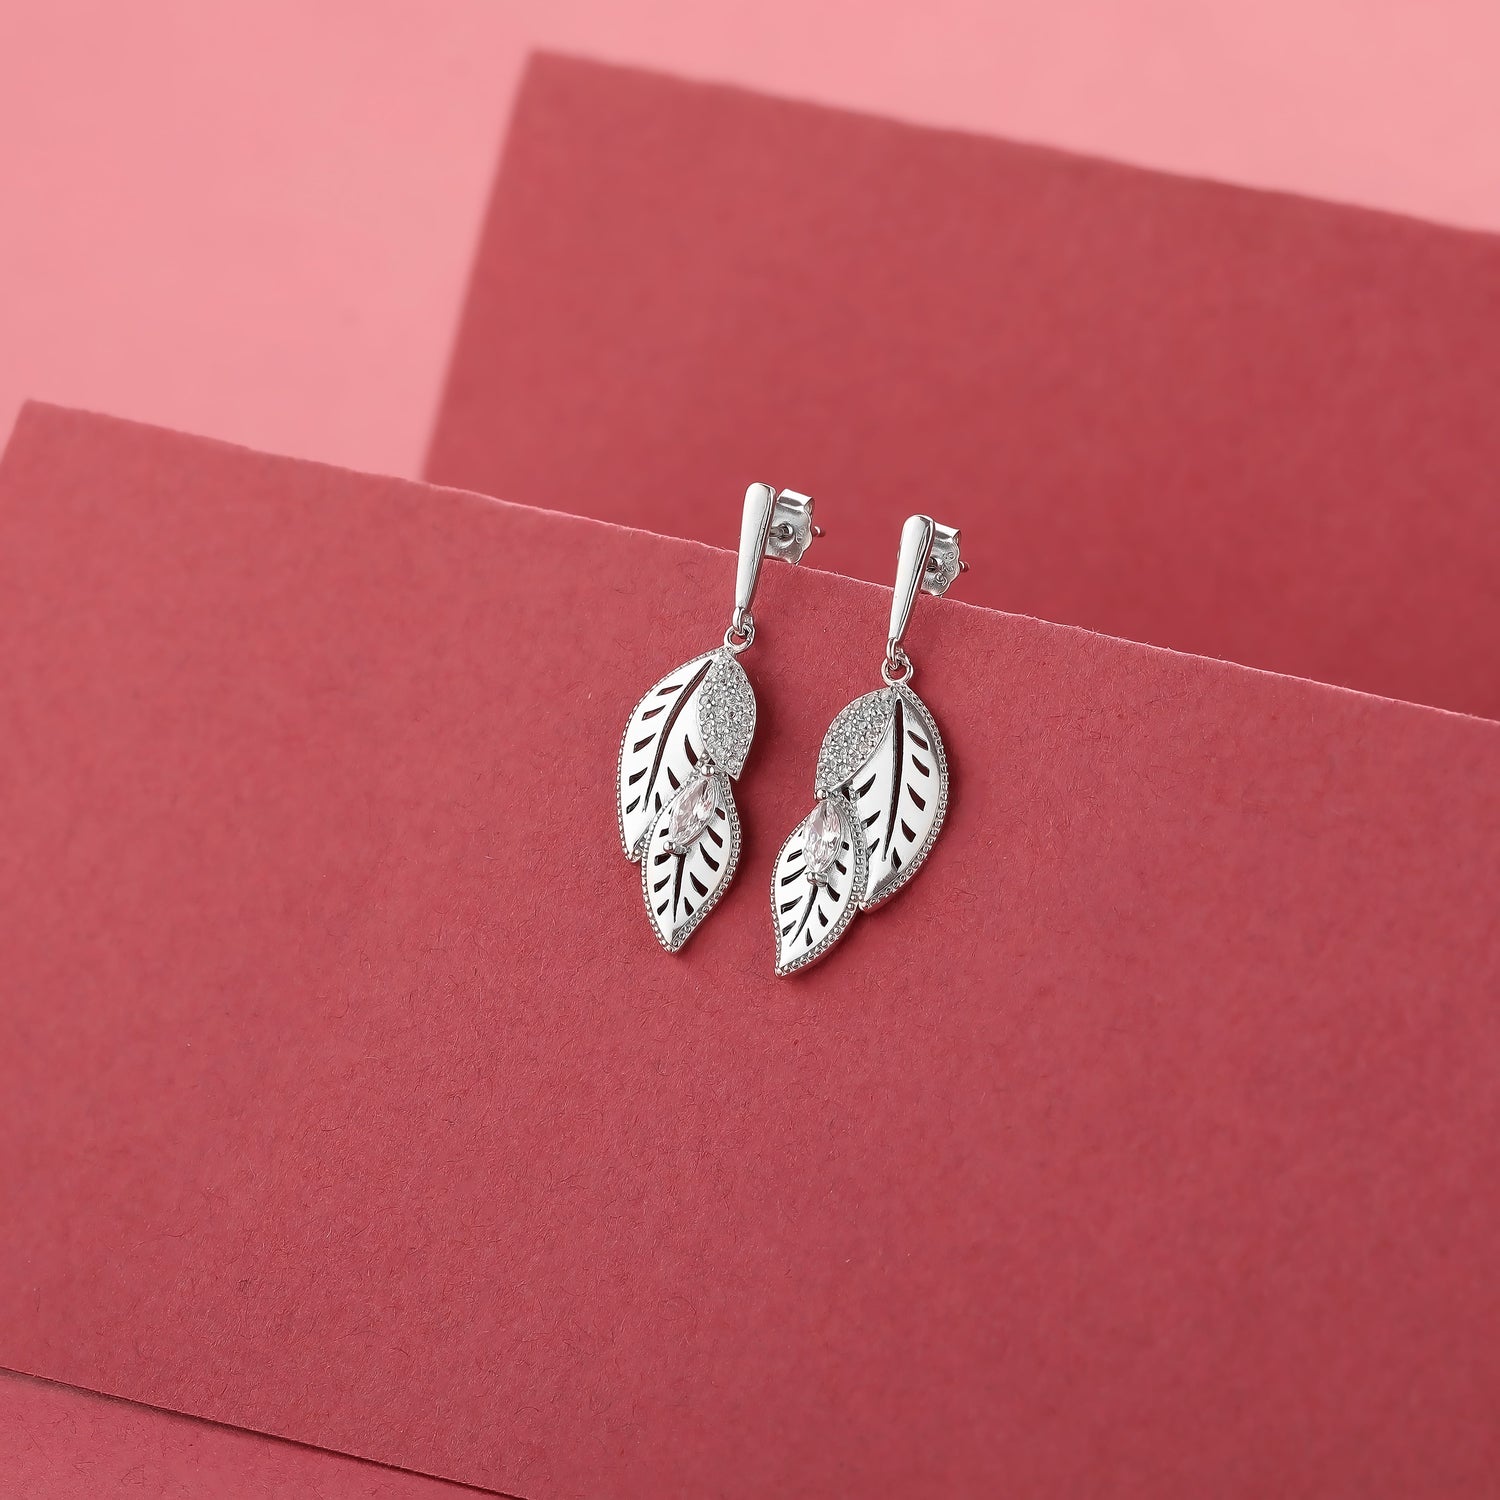 Whimsical Feather Dance: 925 Sterling Silver Earrings - Hangings